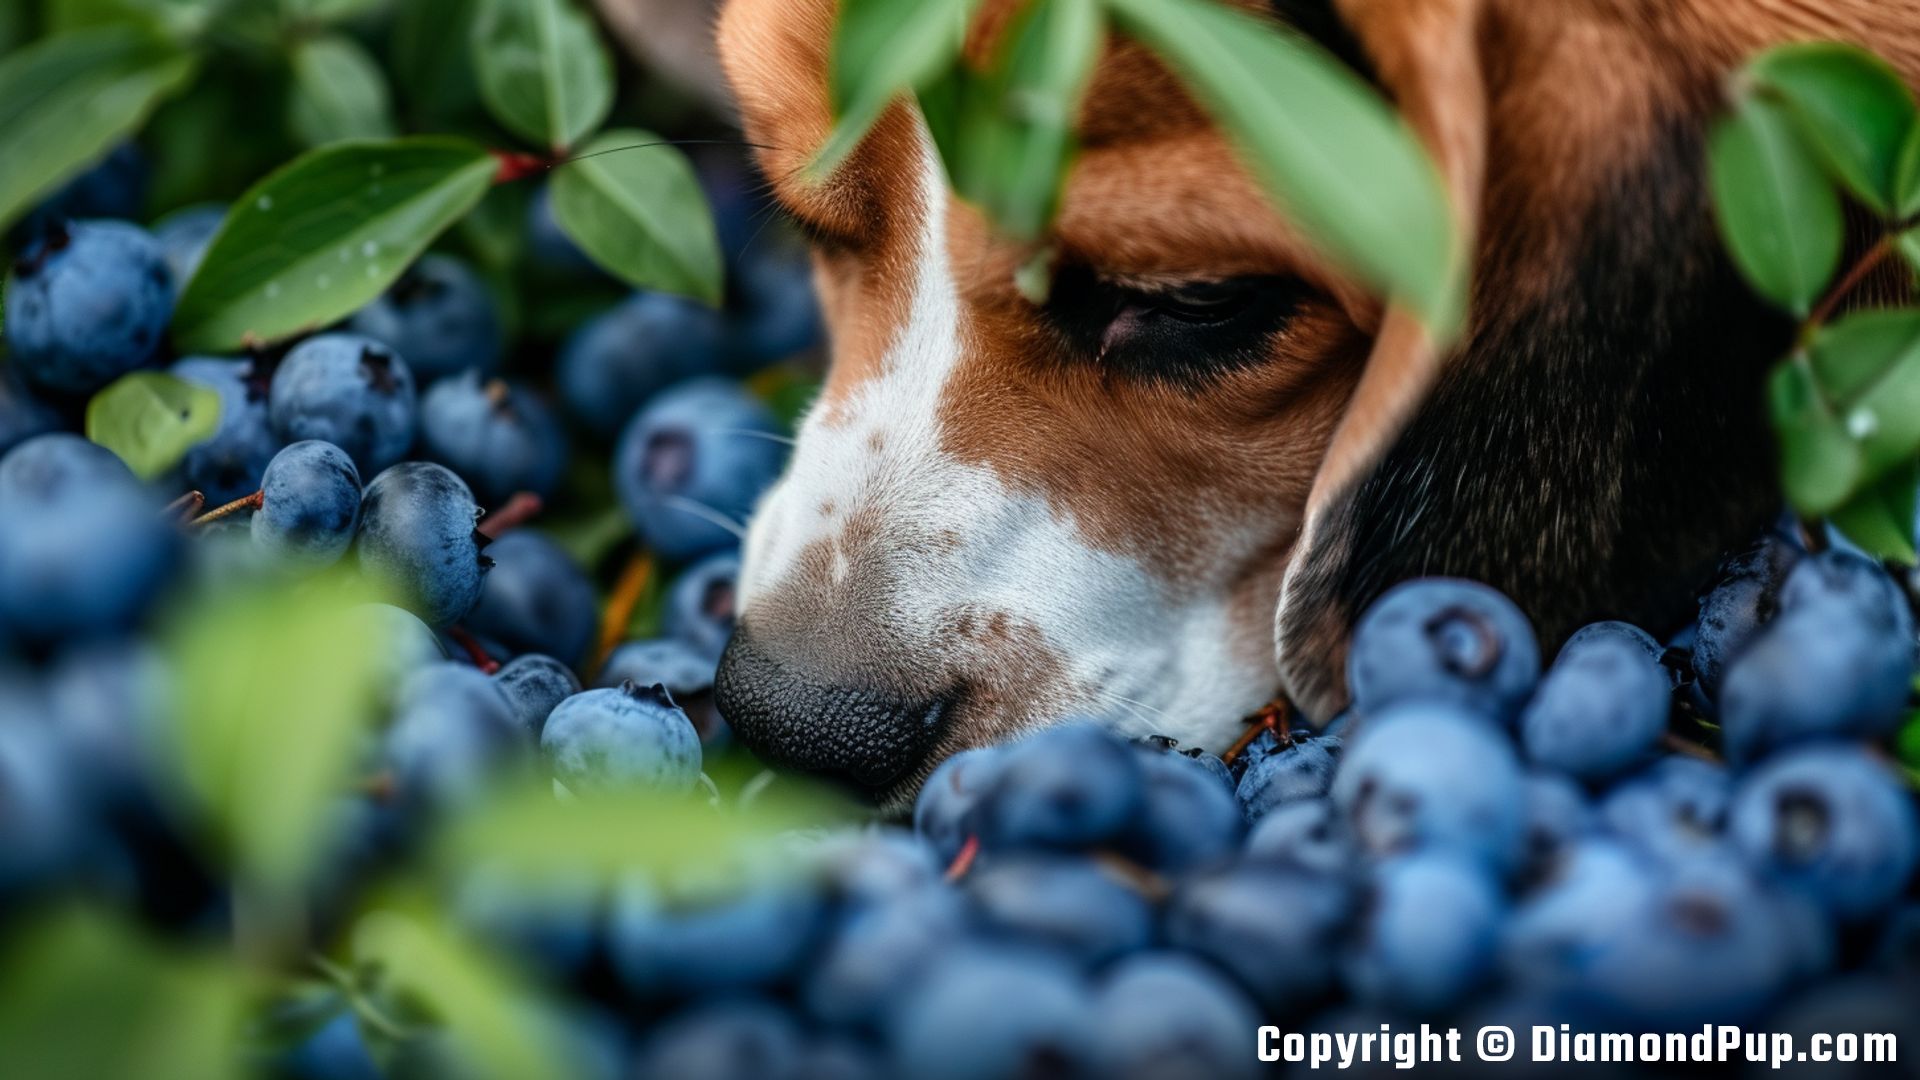 Photograph of a Cute Beagle Eating Blueberries